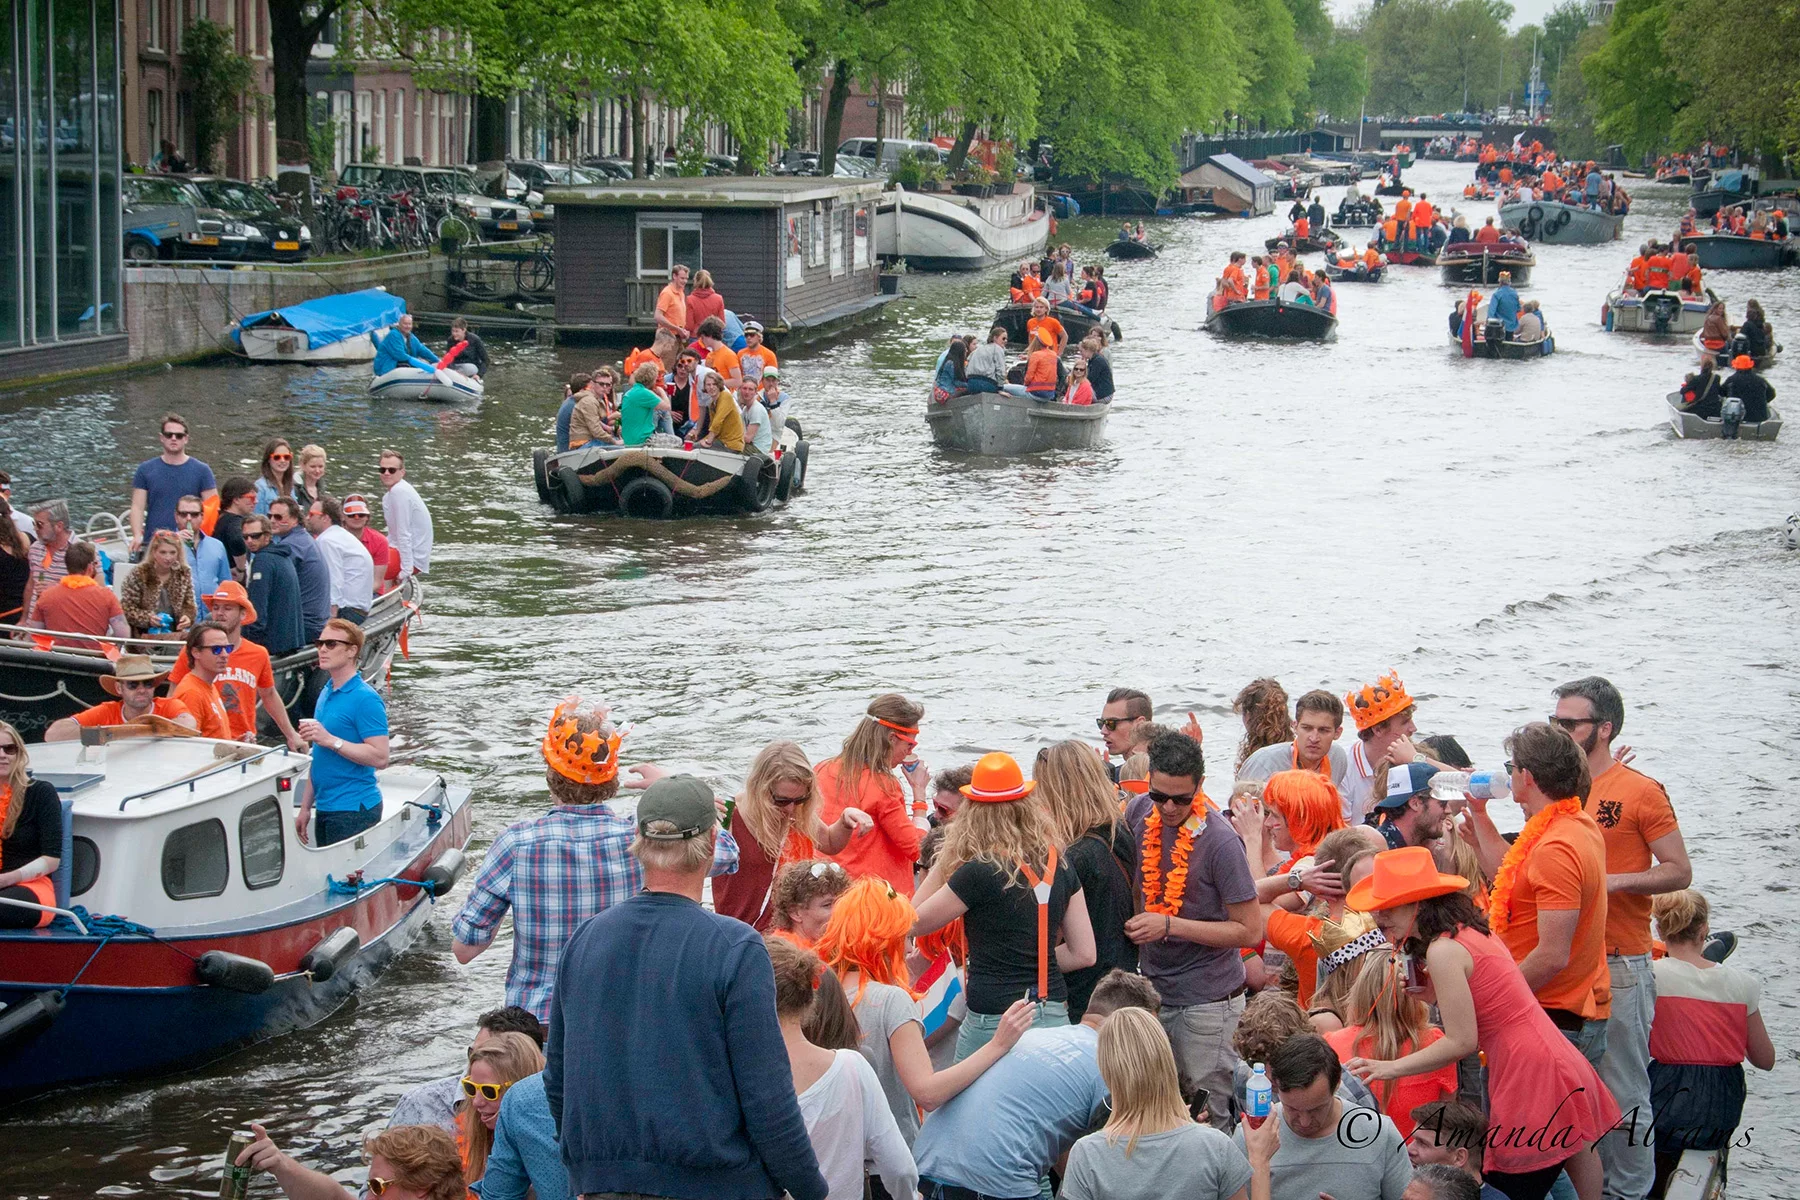 Boats on an Amsterdam canal on Koningsdag